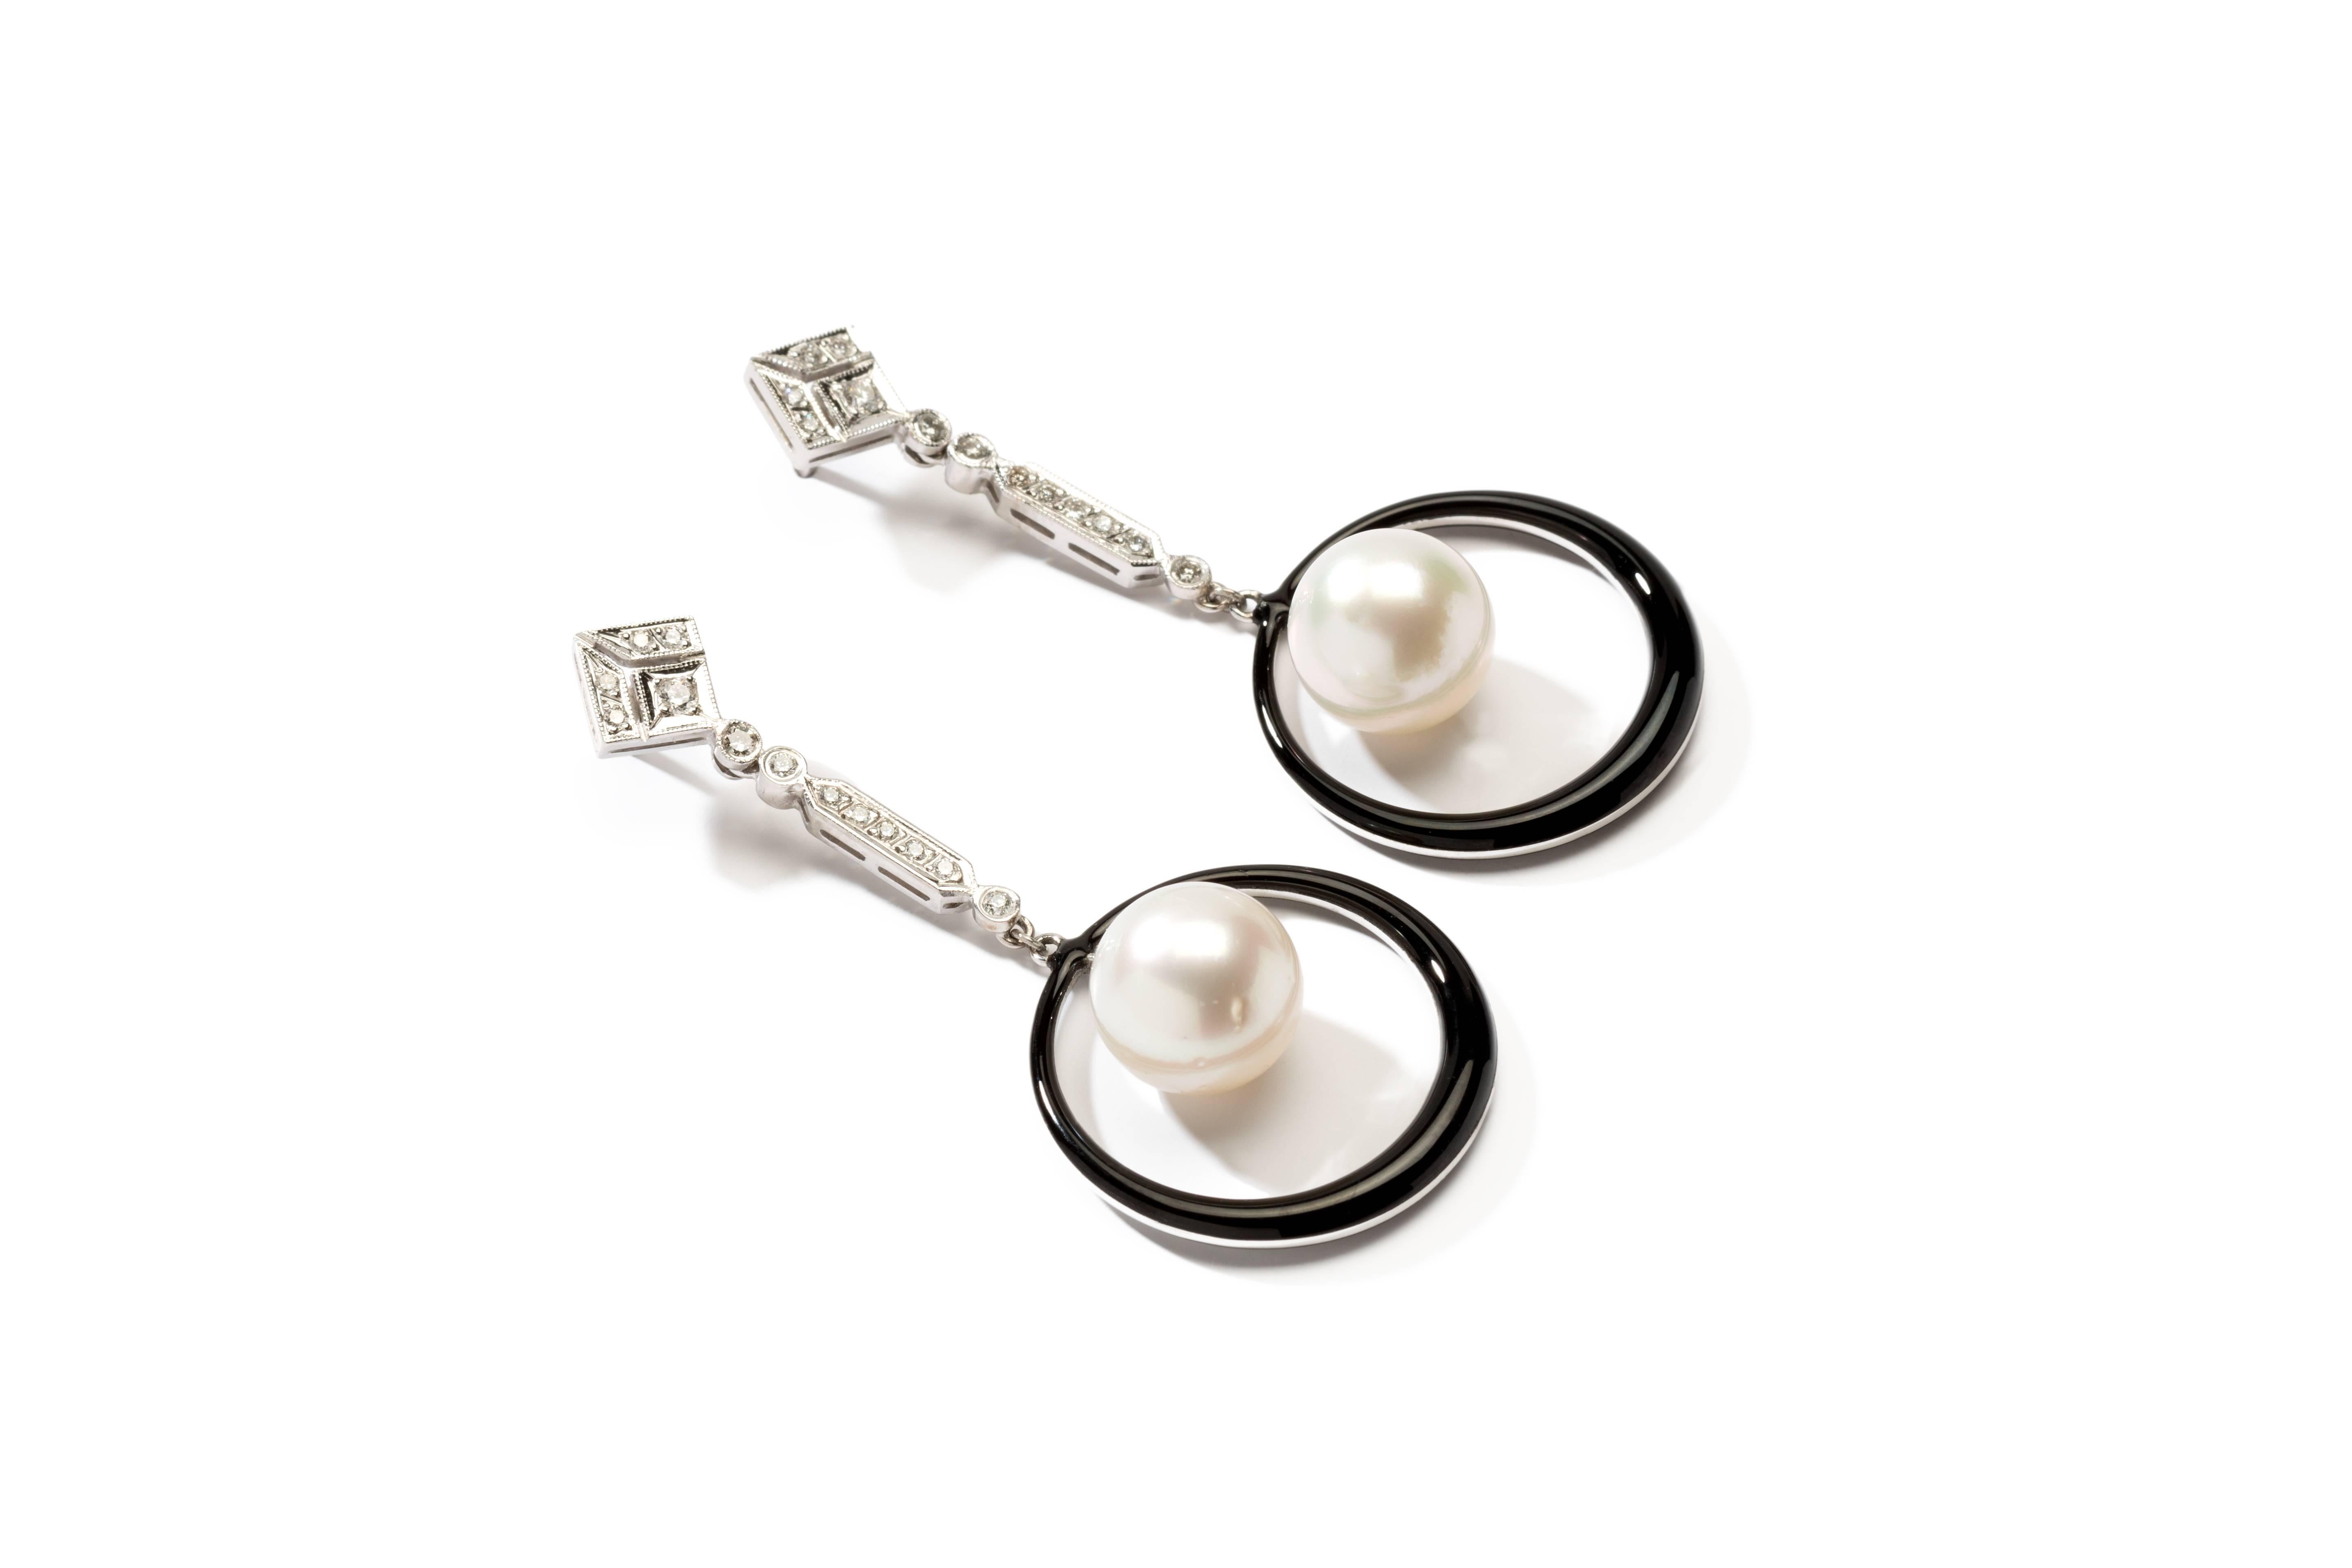 A beautiful set with 2 south sea pearls of ca. 11 mm each and 26 brilliant-cut diamonds weighing approximately 0,60 ct. Black enamel rings as a contrast. Mounted in 18 K white gold in a millegrain setting. Total weight: 12,55 g.
Length: 2.17 in (